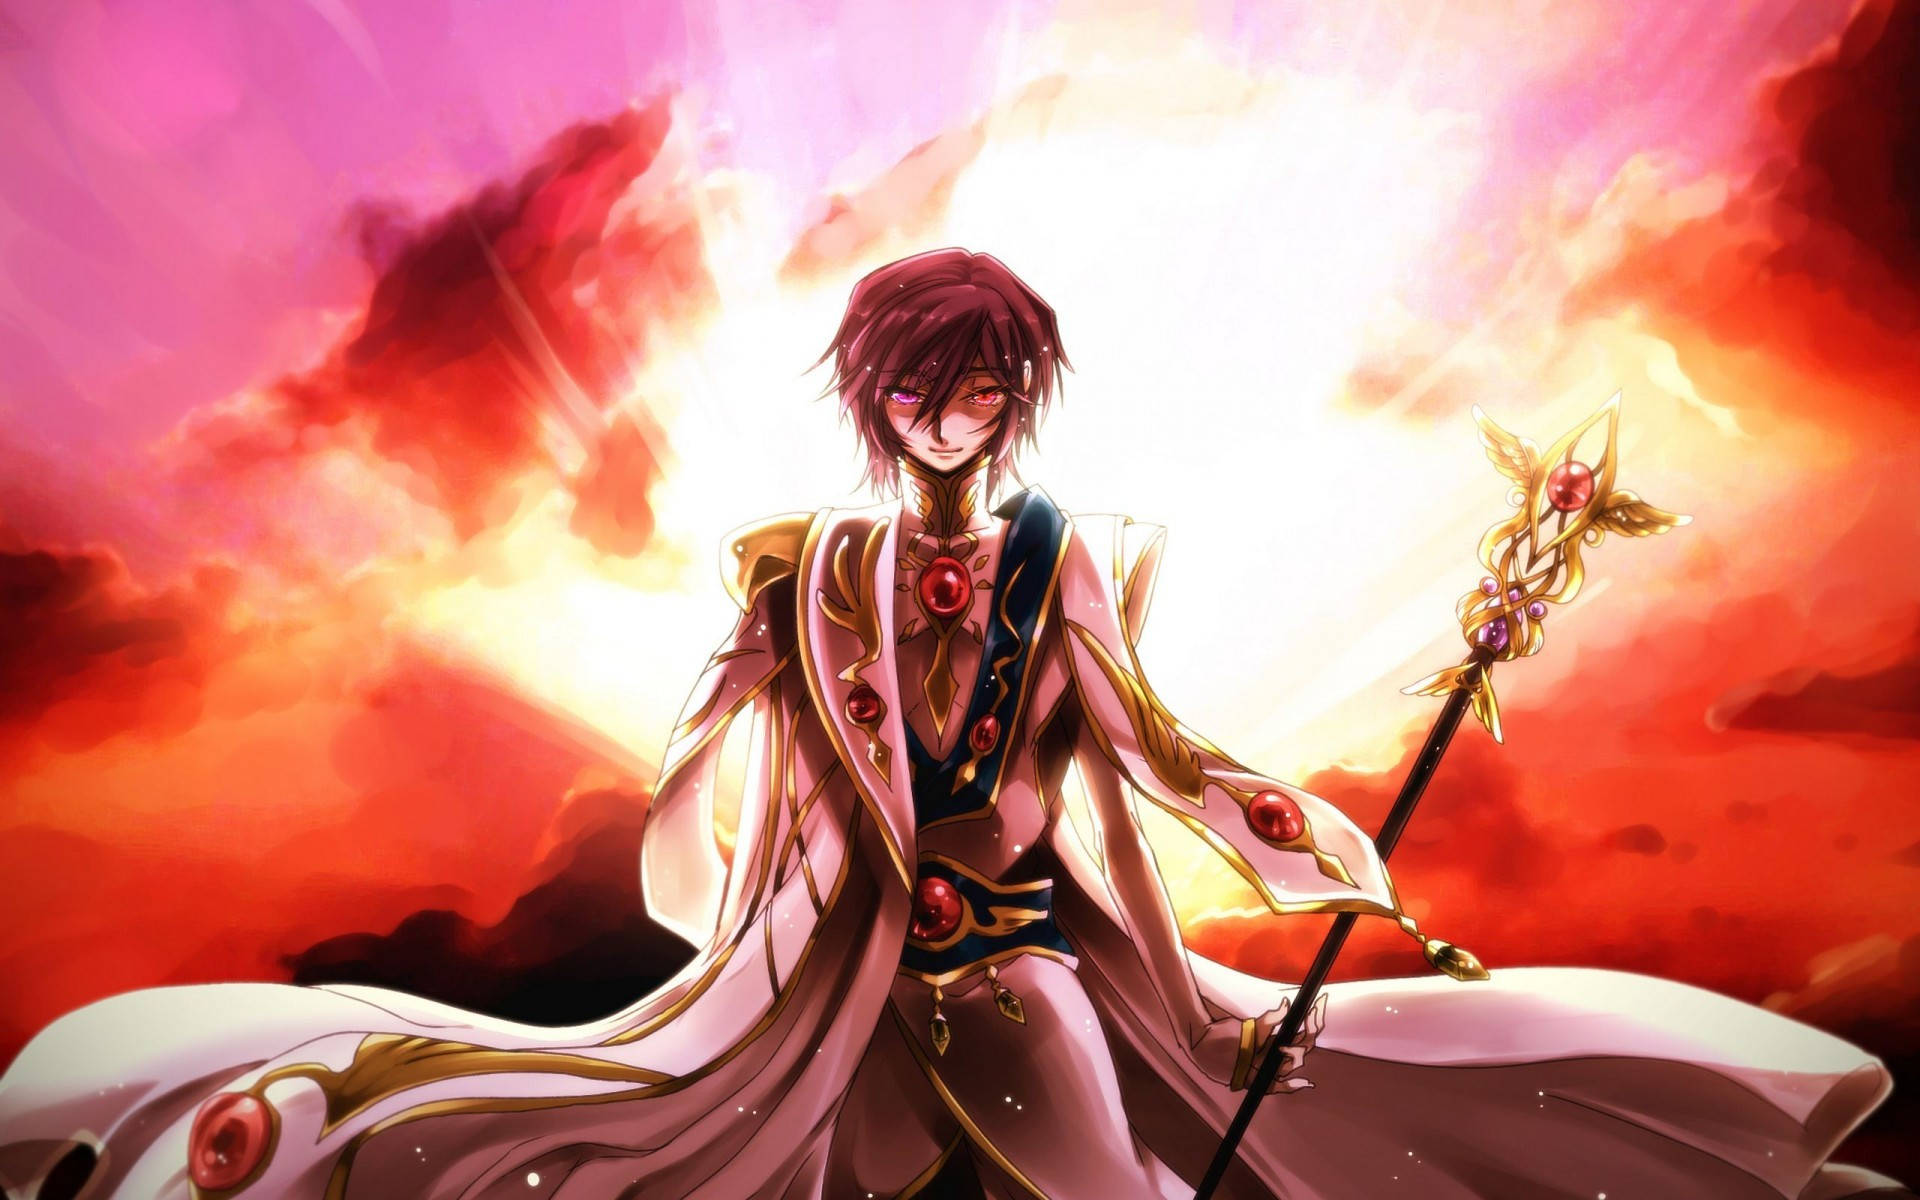 Mighty Lelouch Lamperouge